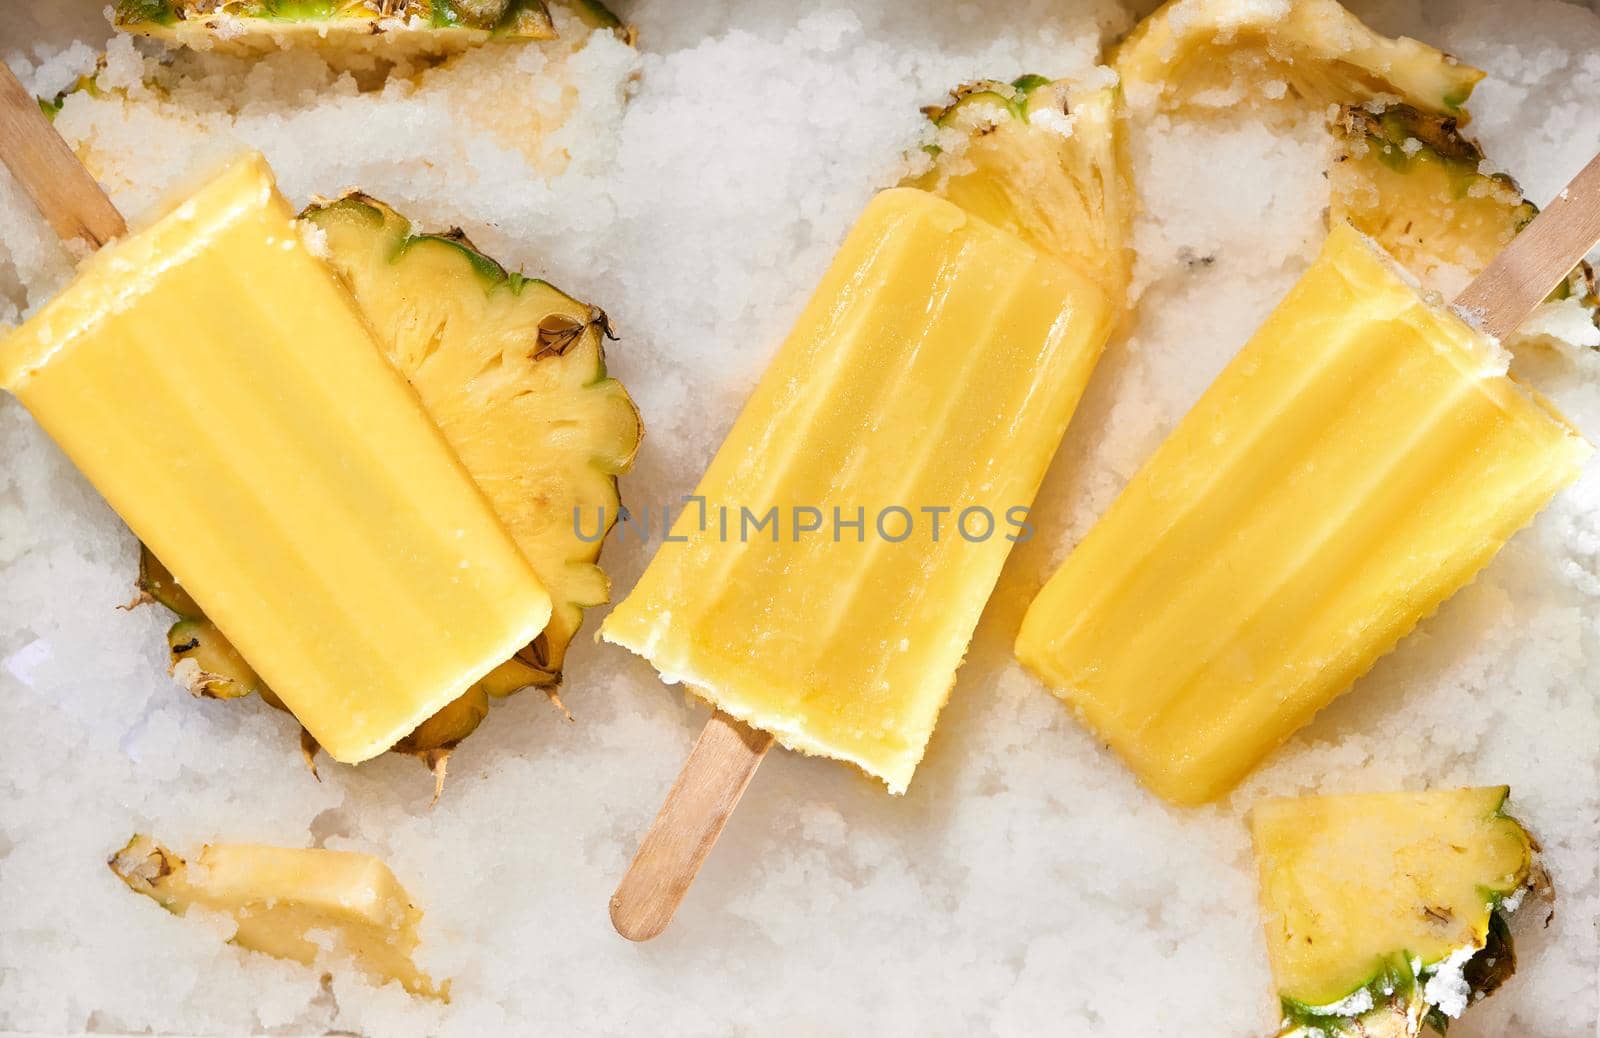 Homemade popsicles with pineapple on stick, top view